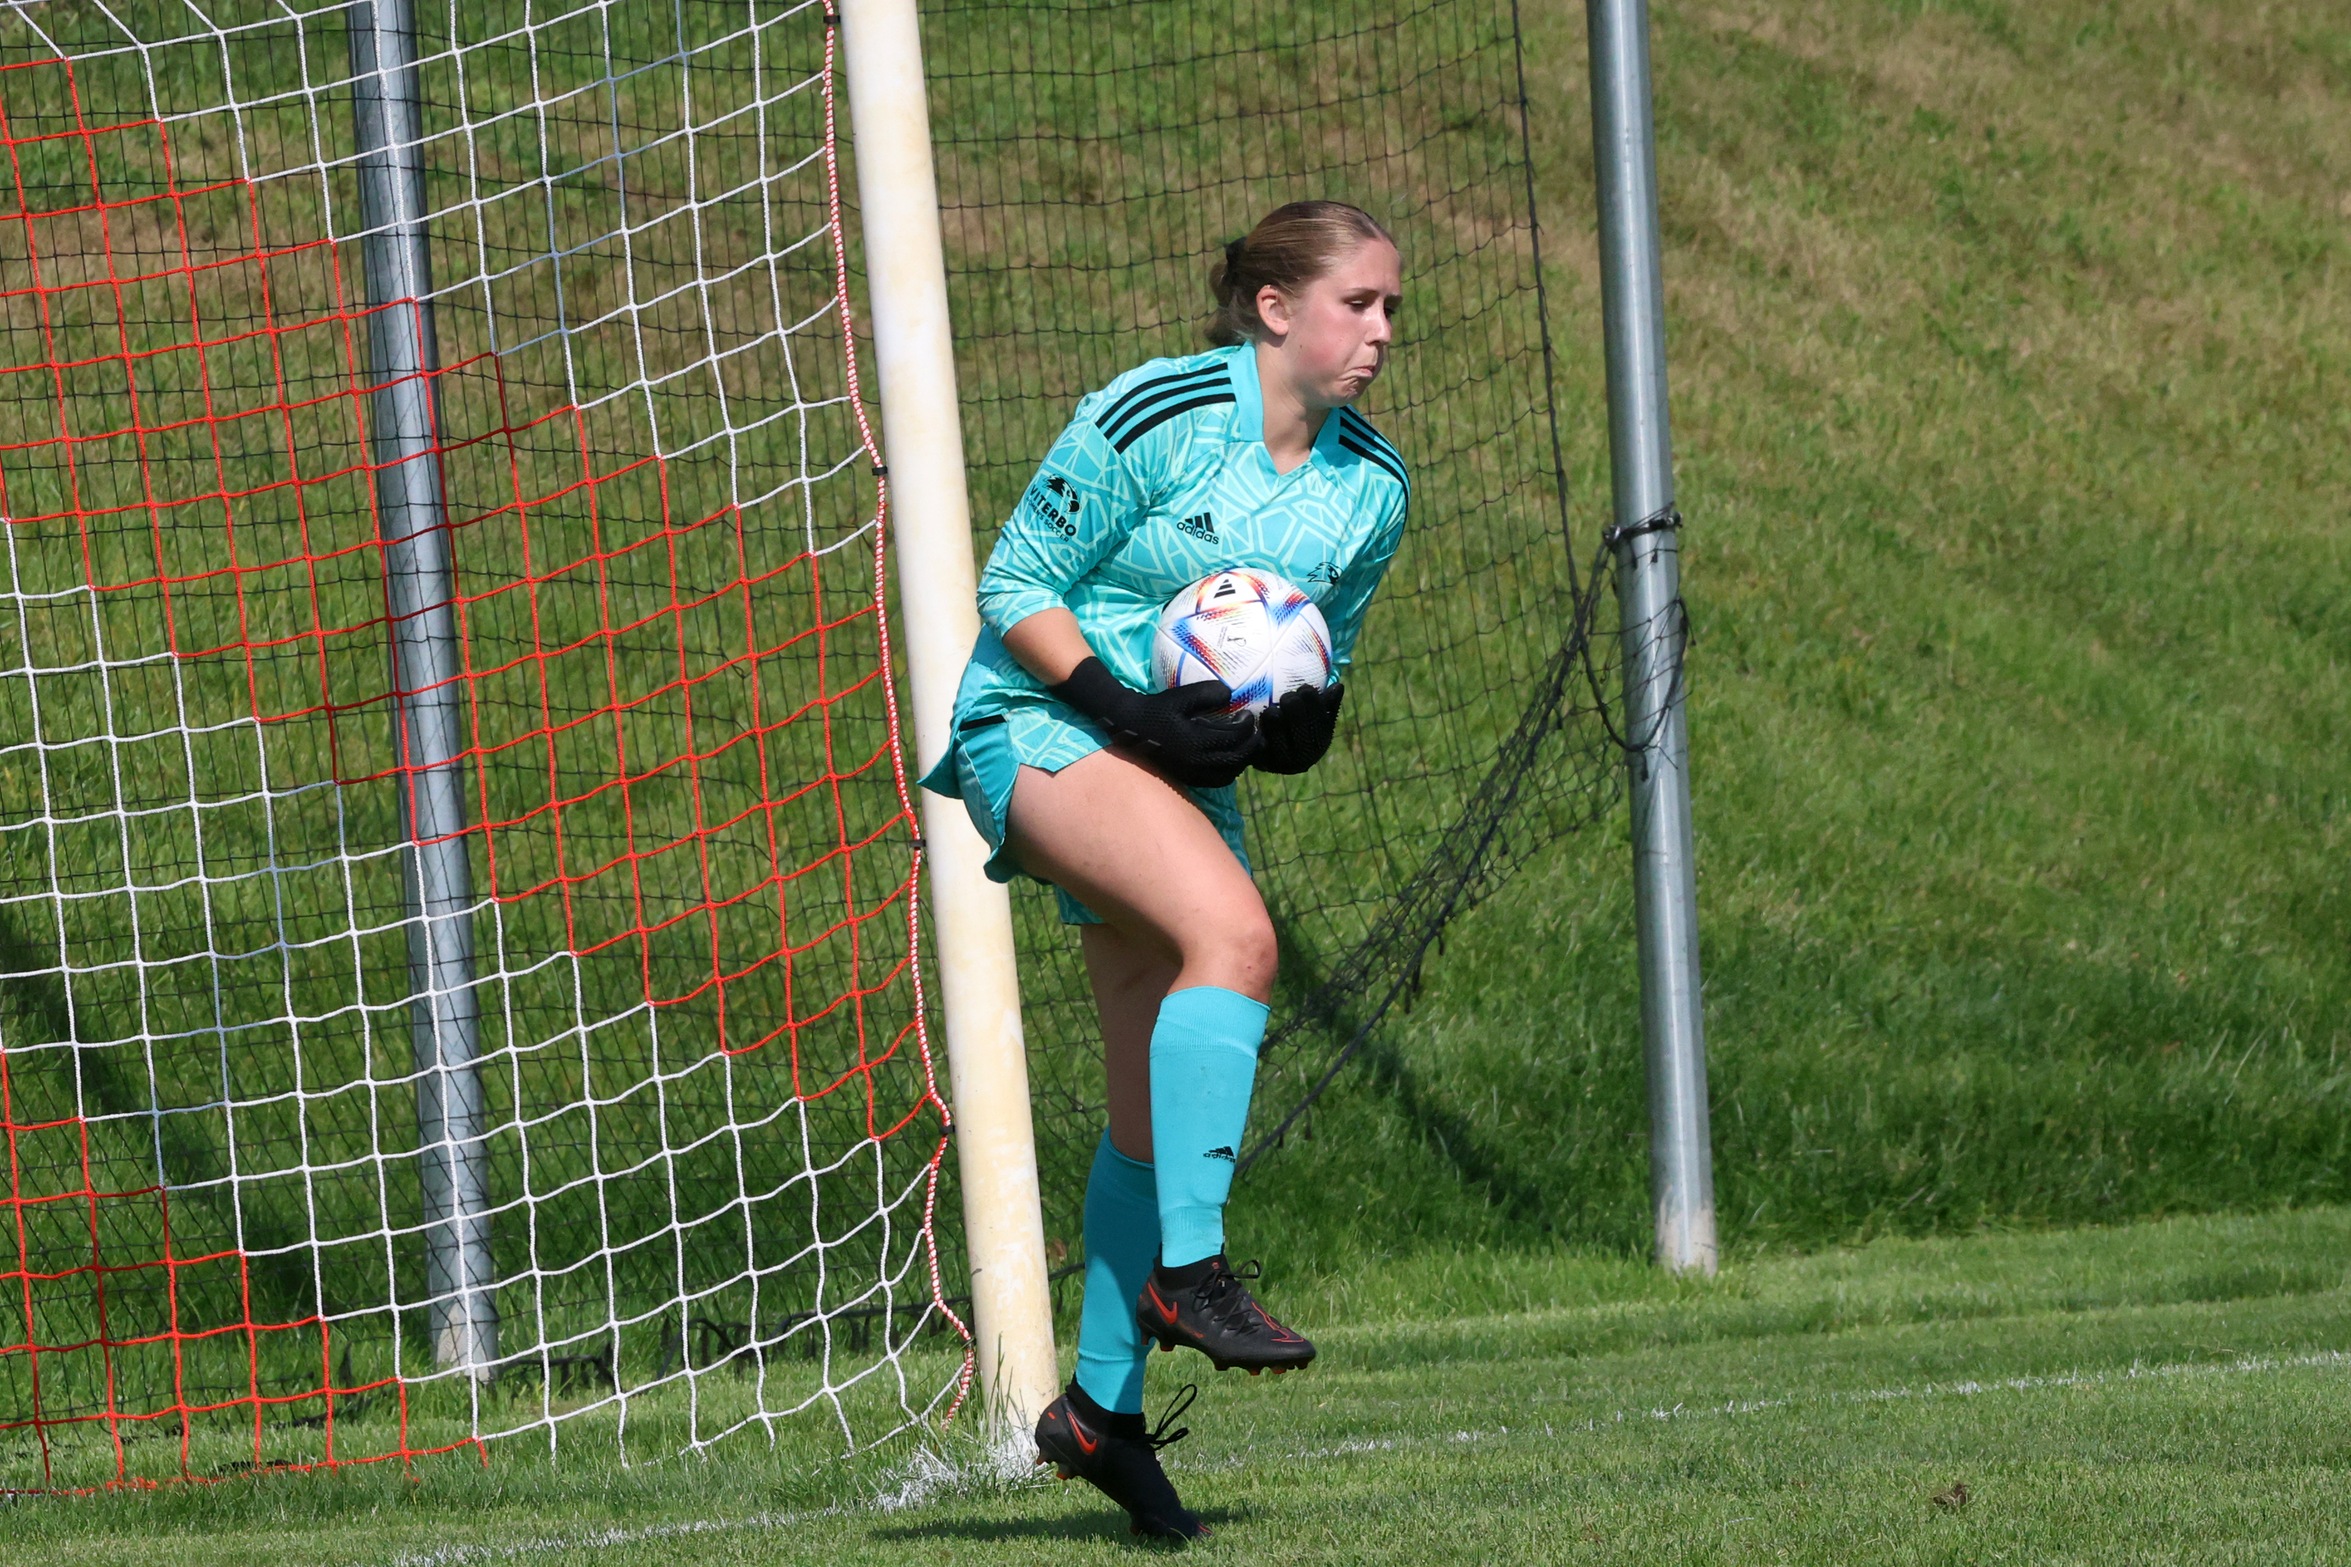 Ripley Records Career-High 12 Saves in Loss